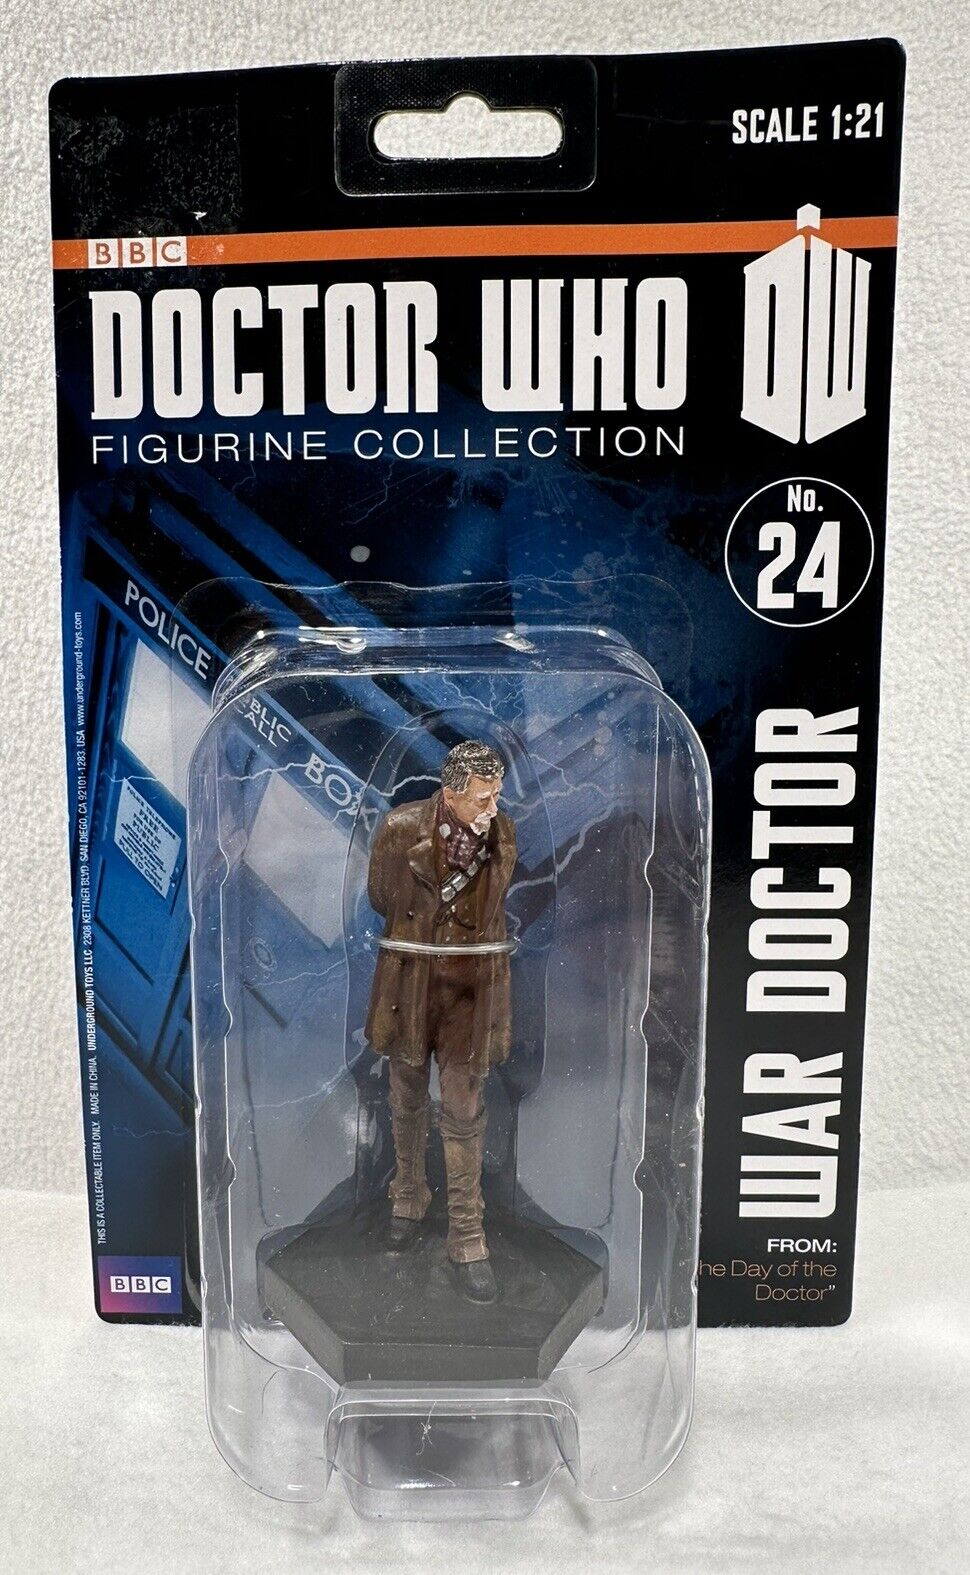 NEW - BBC Doctor Who Figurine Collection, 1:21 Scale No. 24 War Doctor